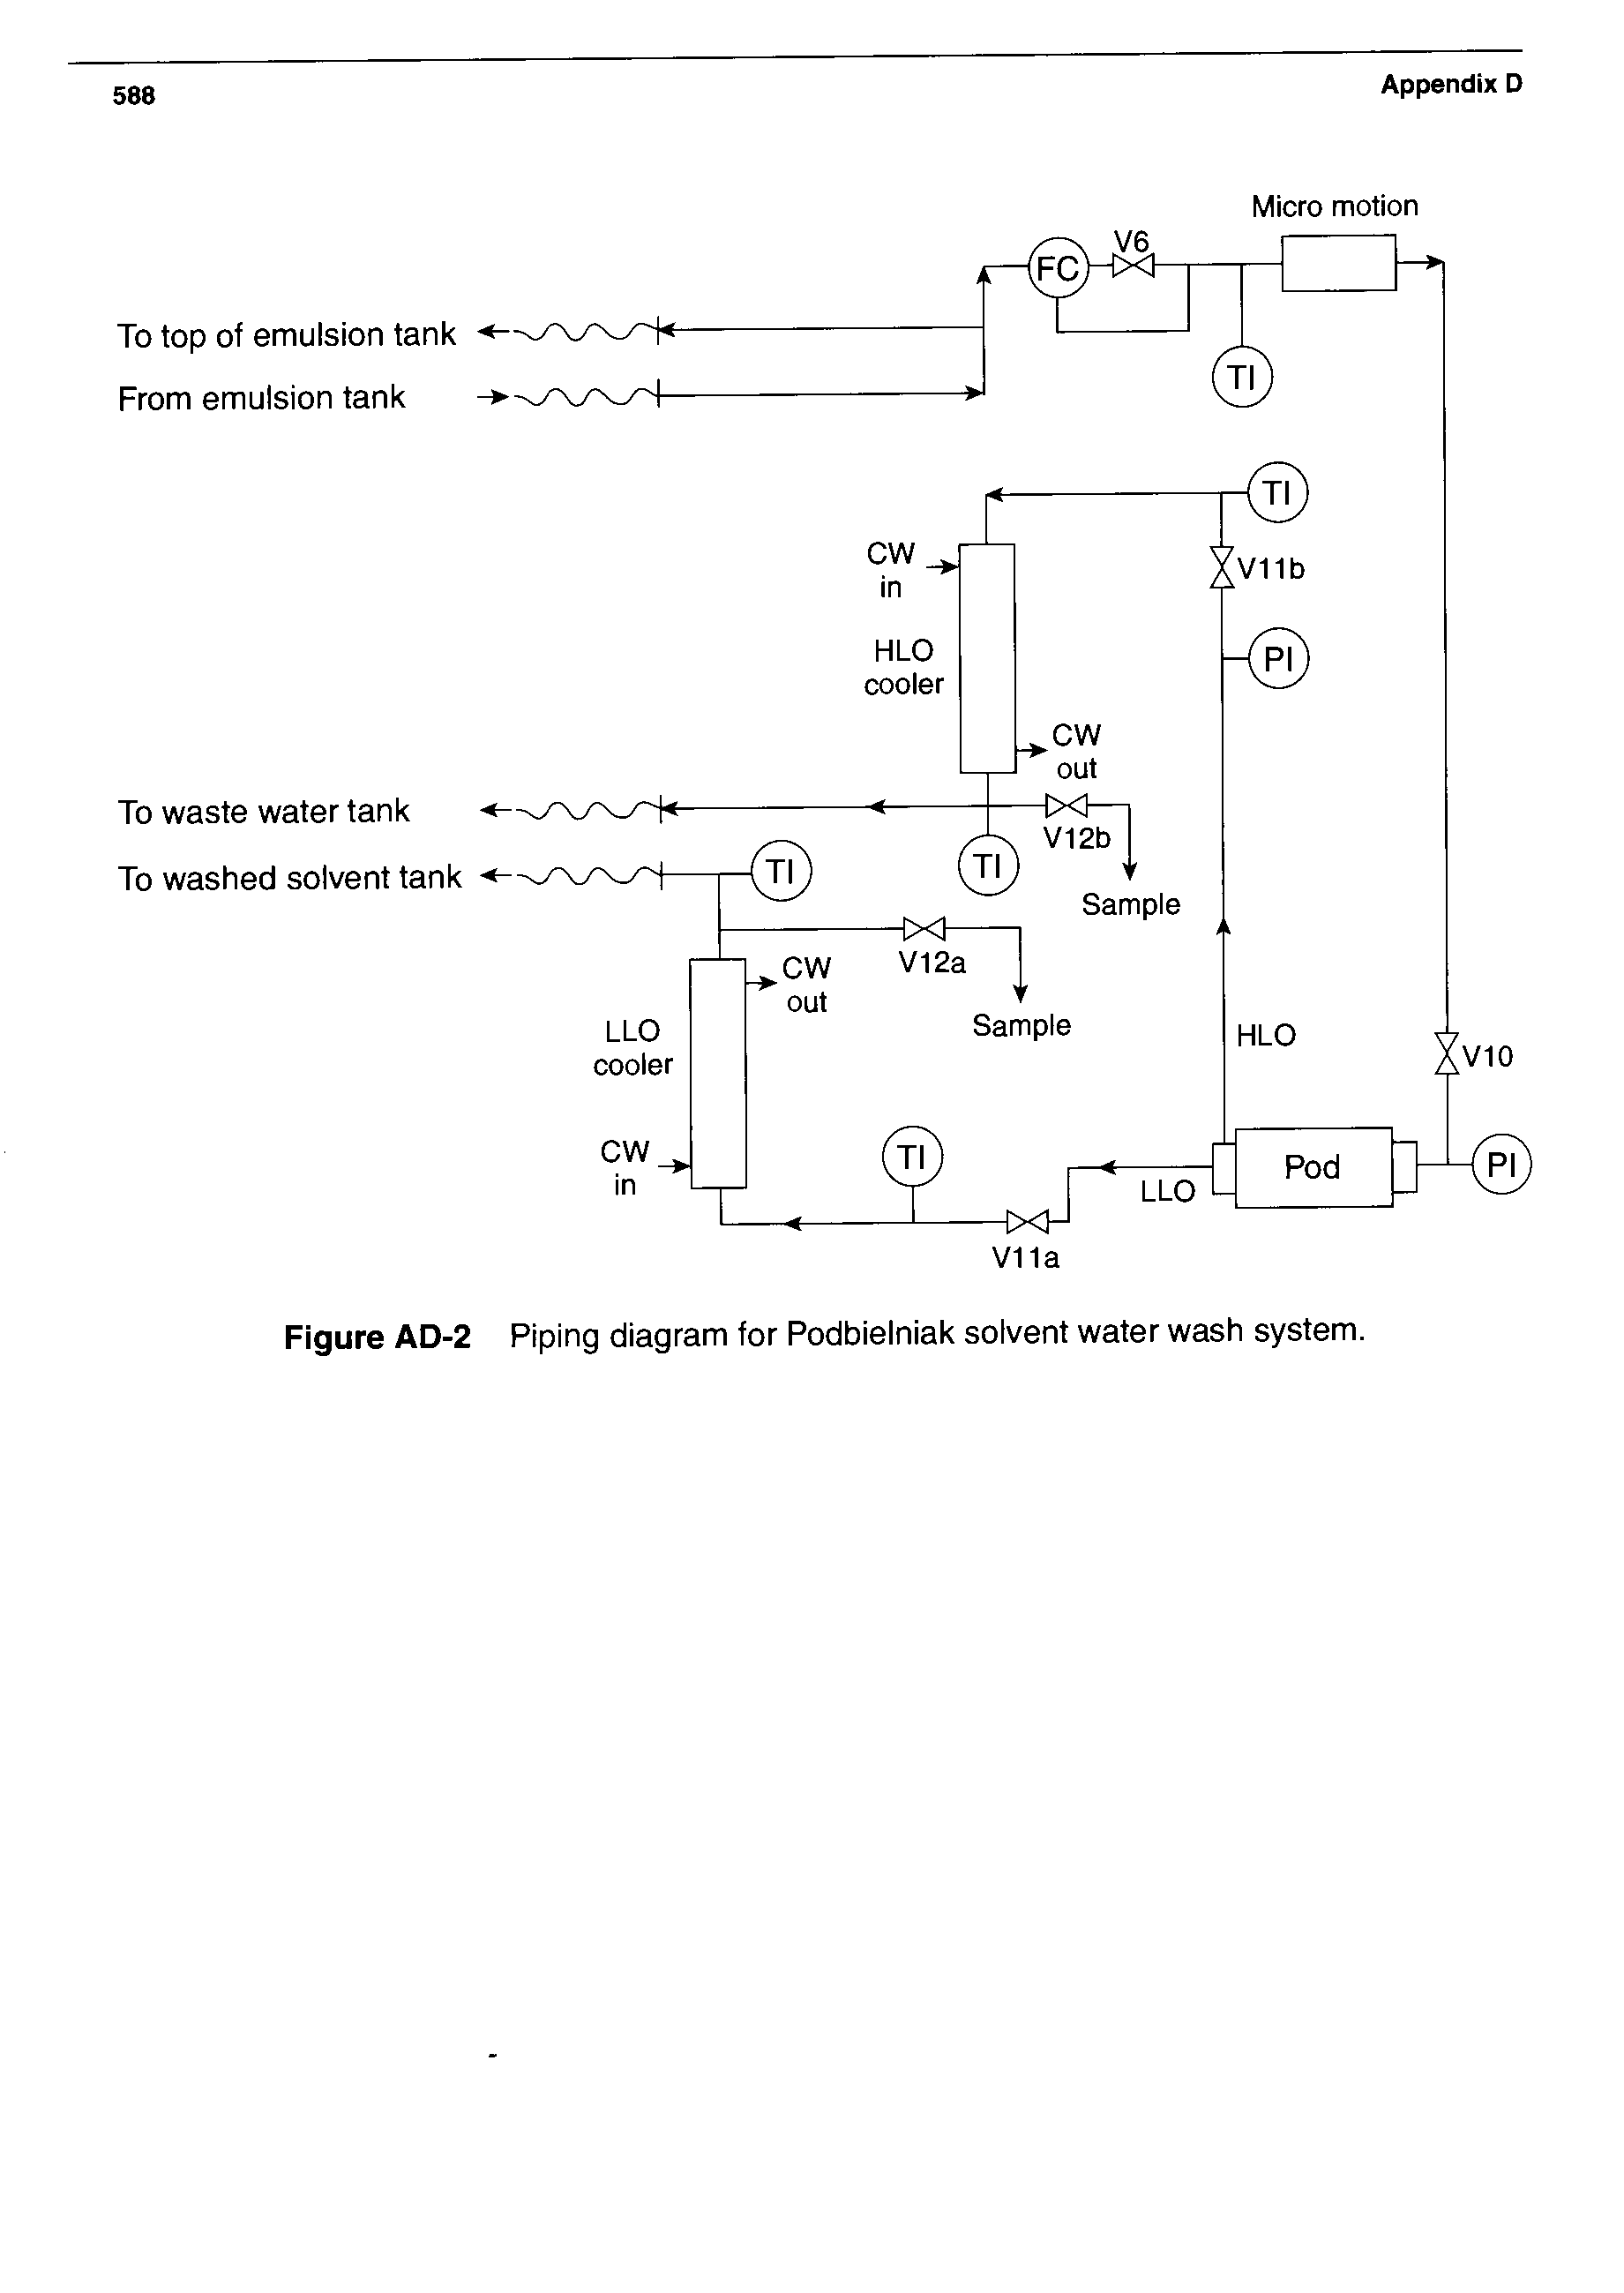 Figure AD-2 Piping diagram for Podbielniak solvent water wash system.